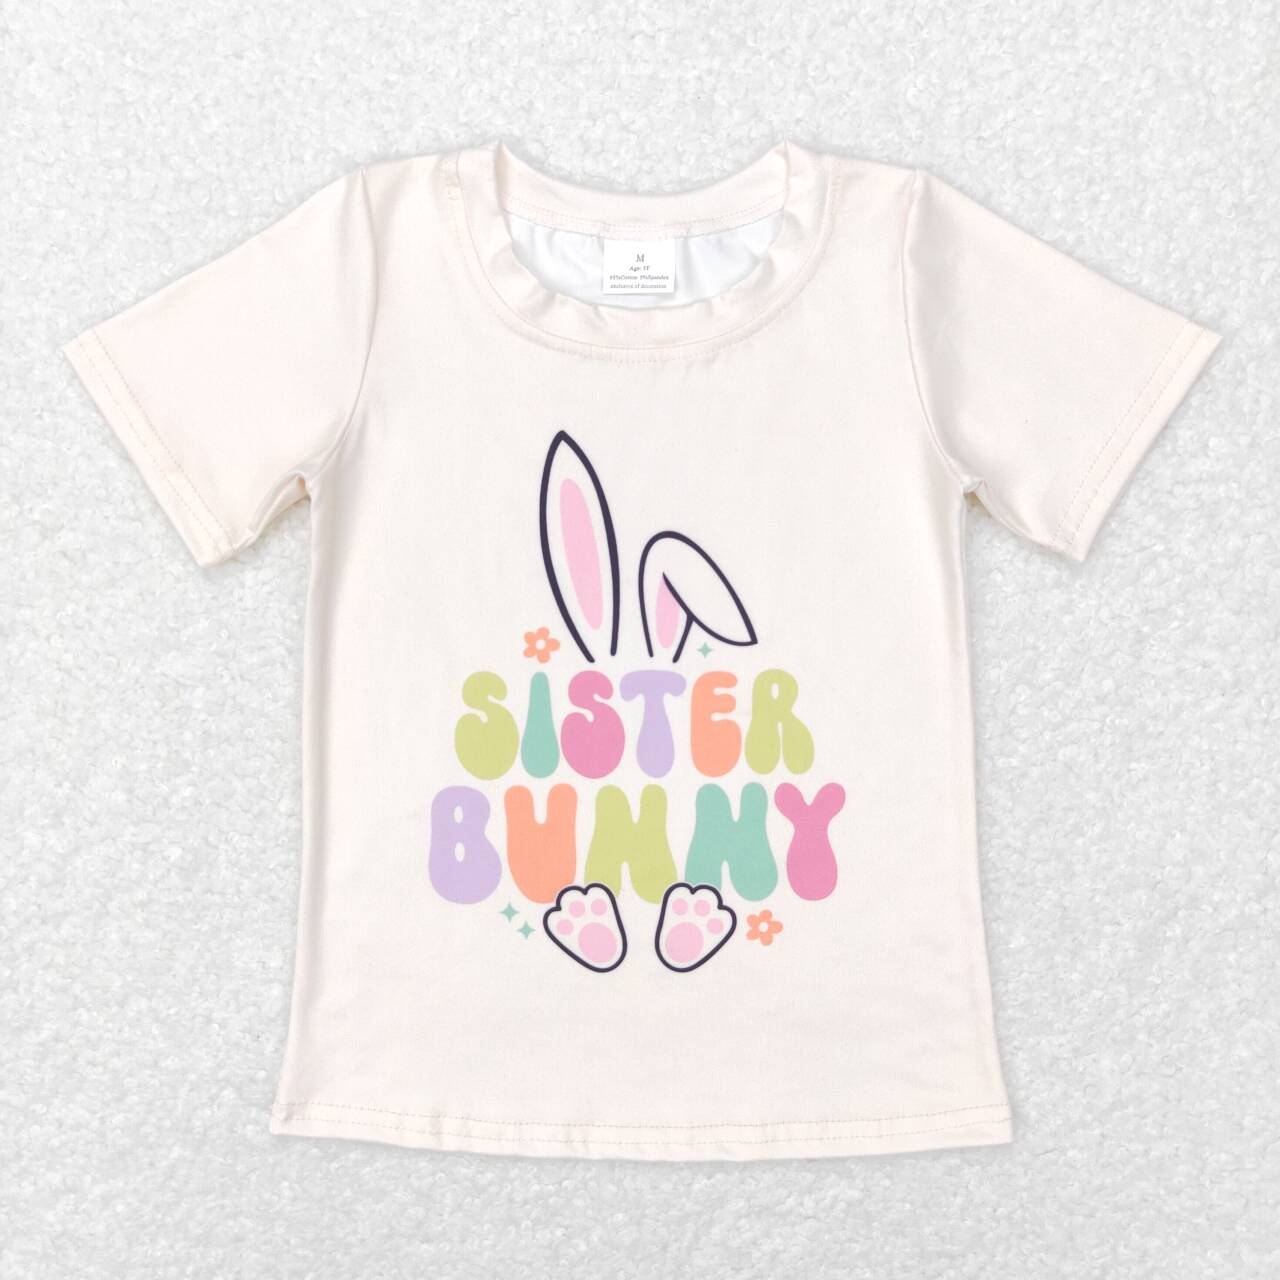 Sister bunny Easter short sleeve t-shirt top